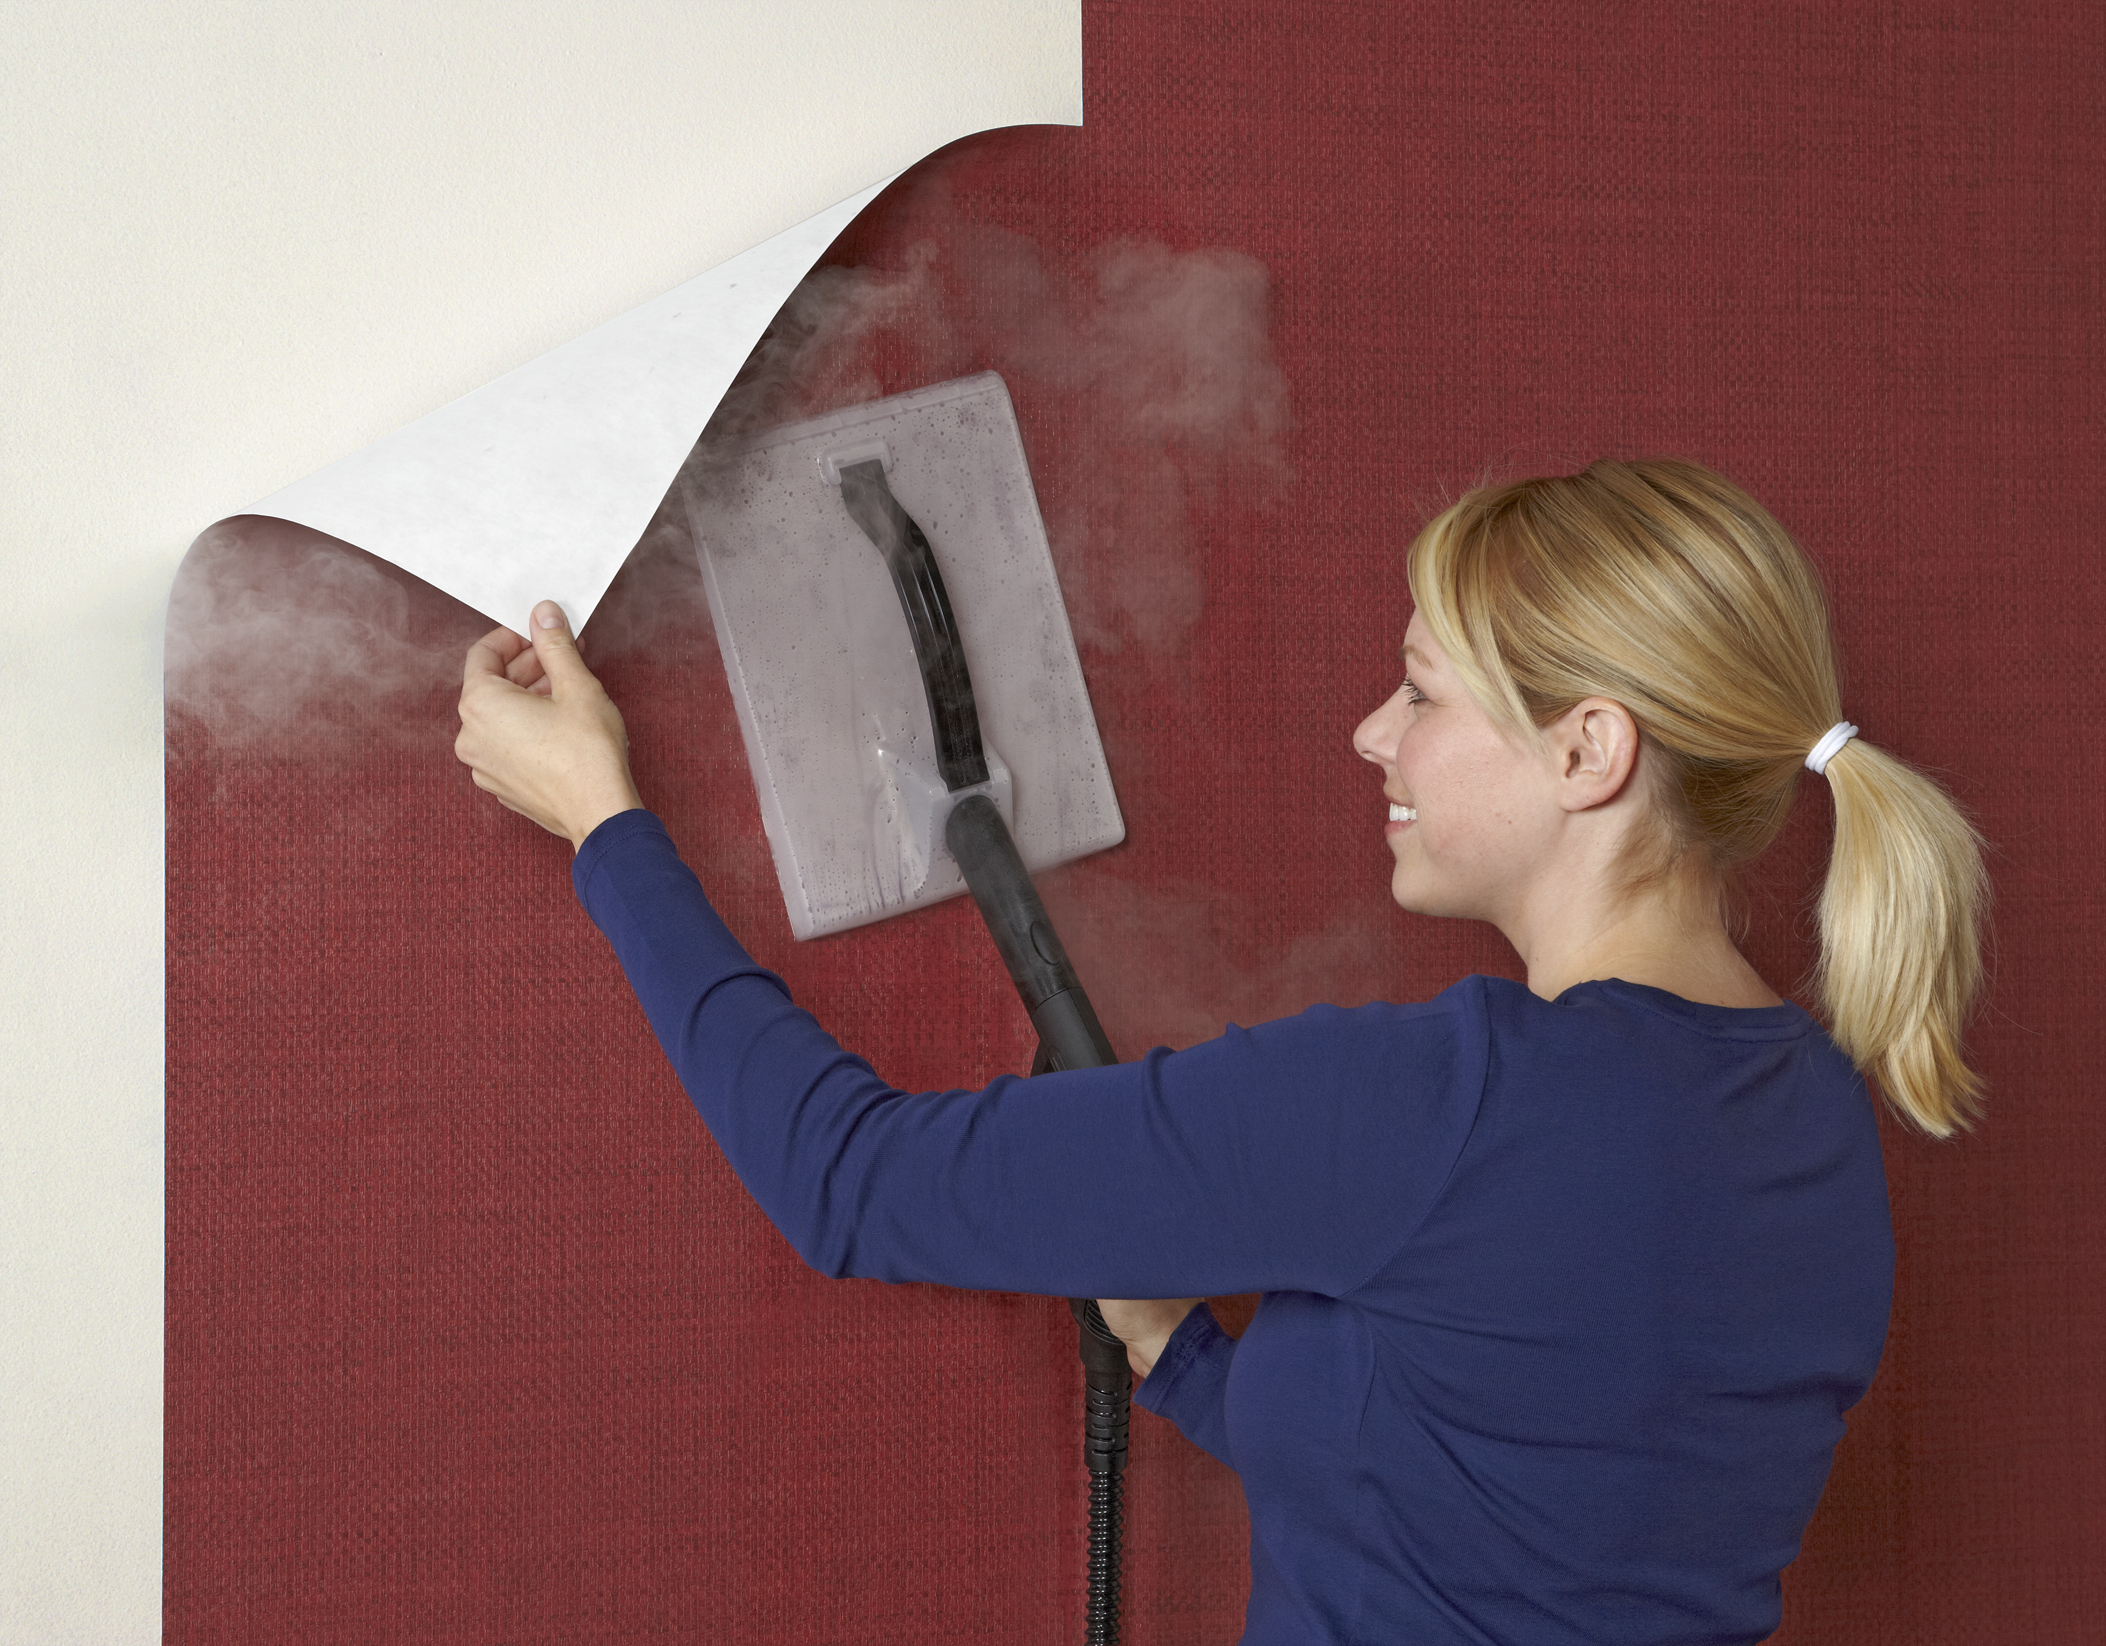 Wallpaper removal with wallpaper steamer 2106x1646